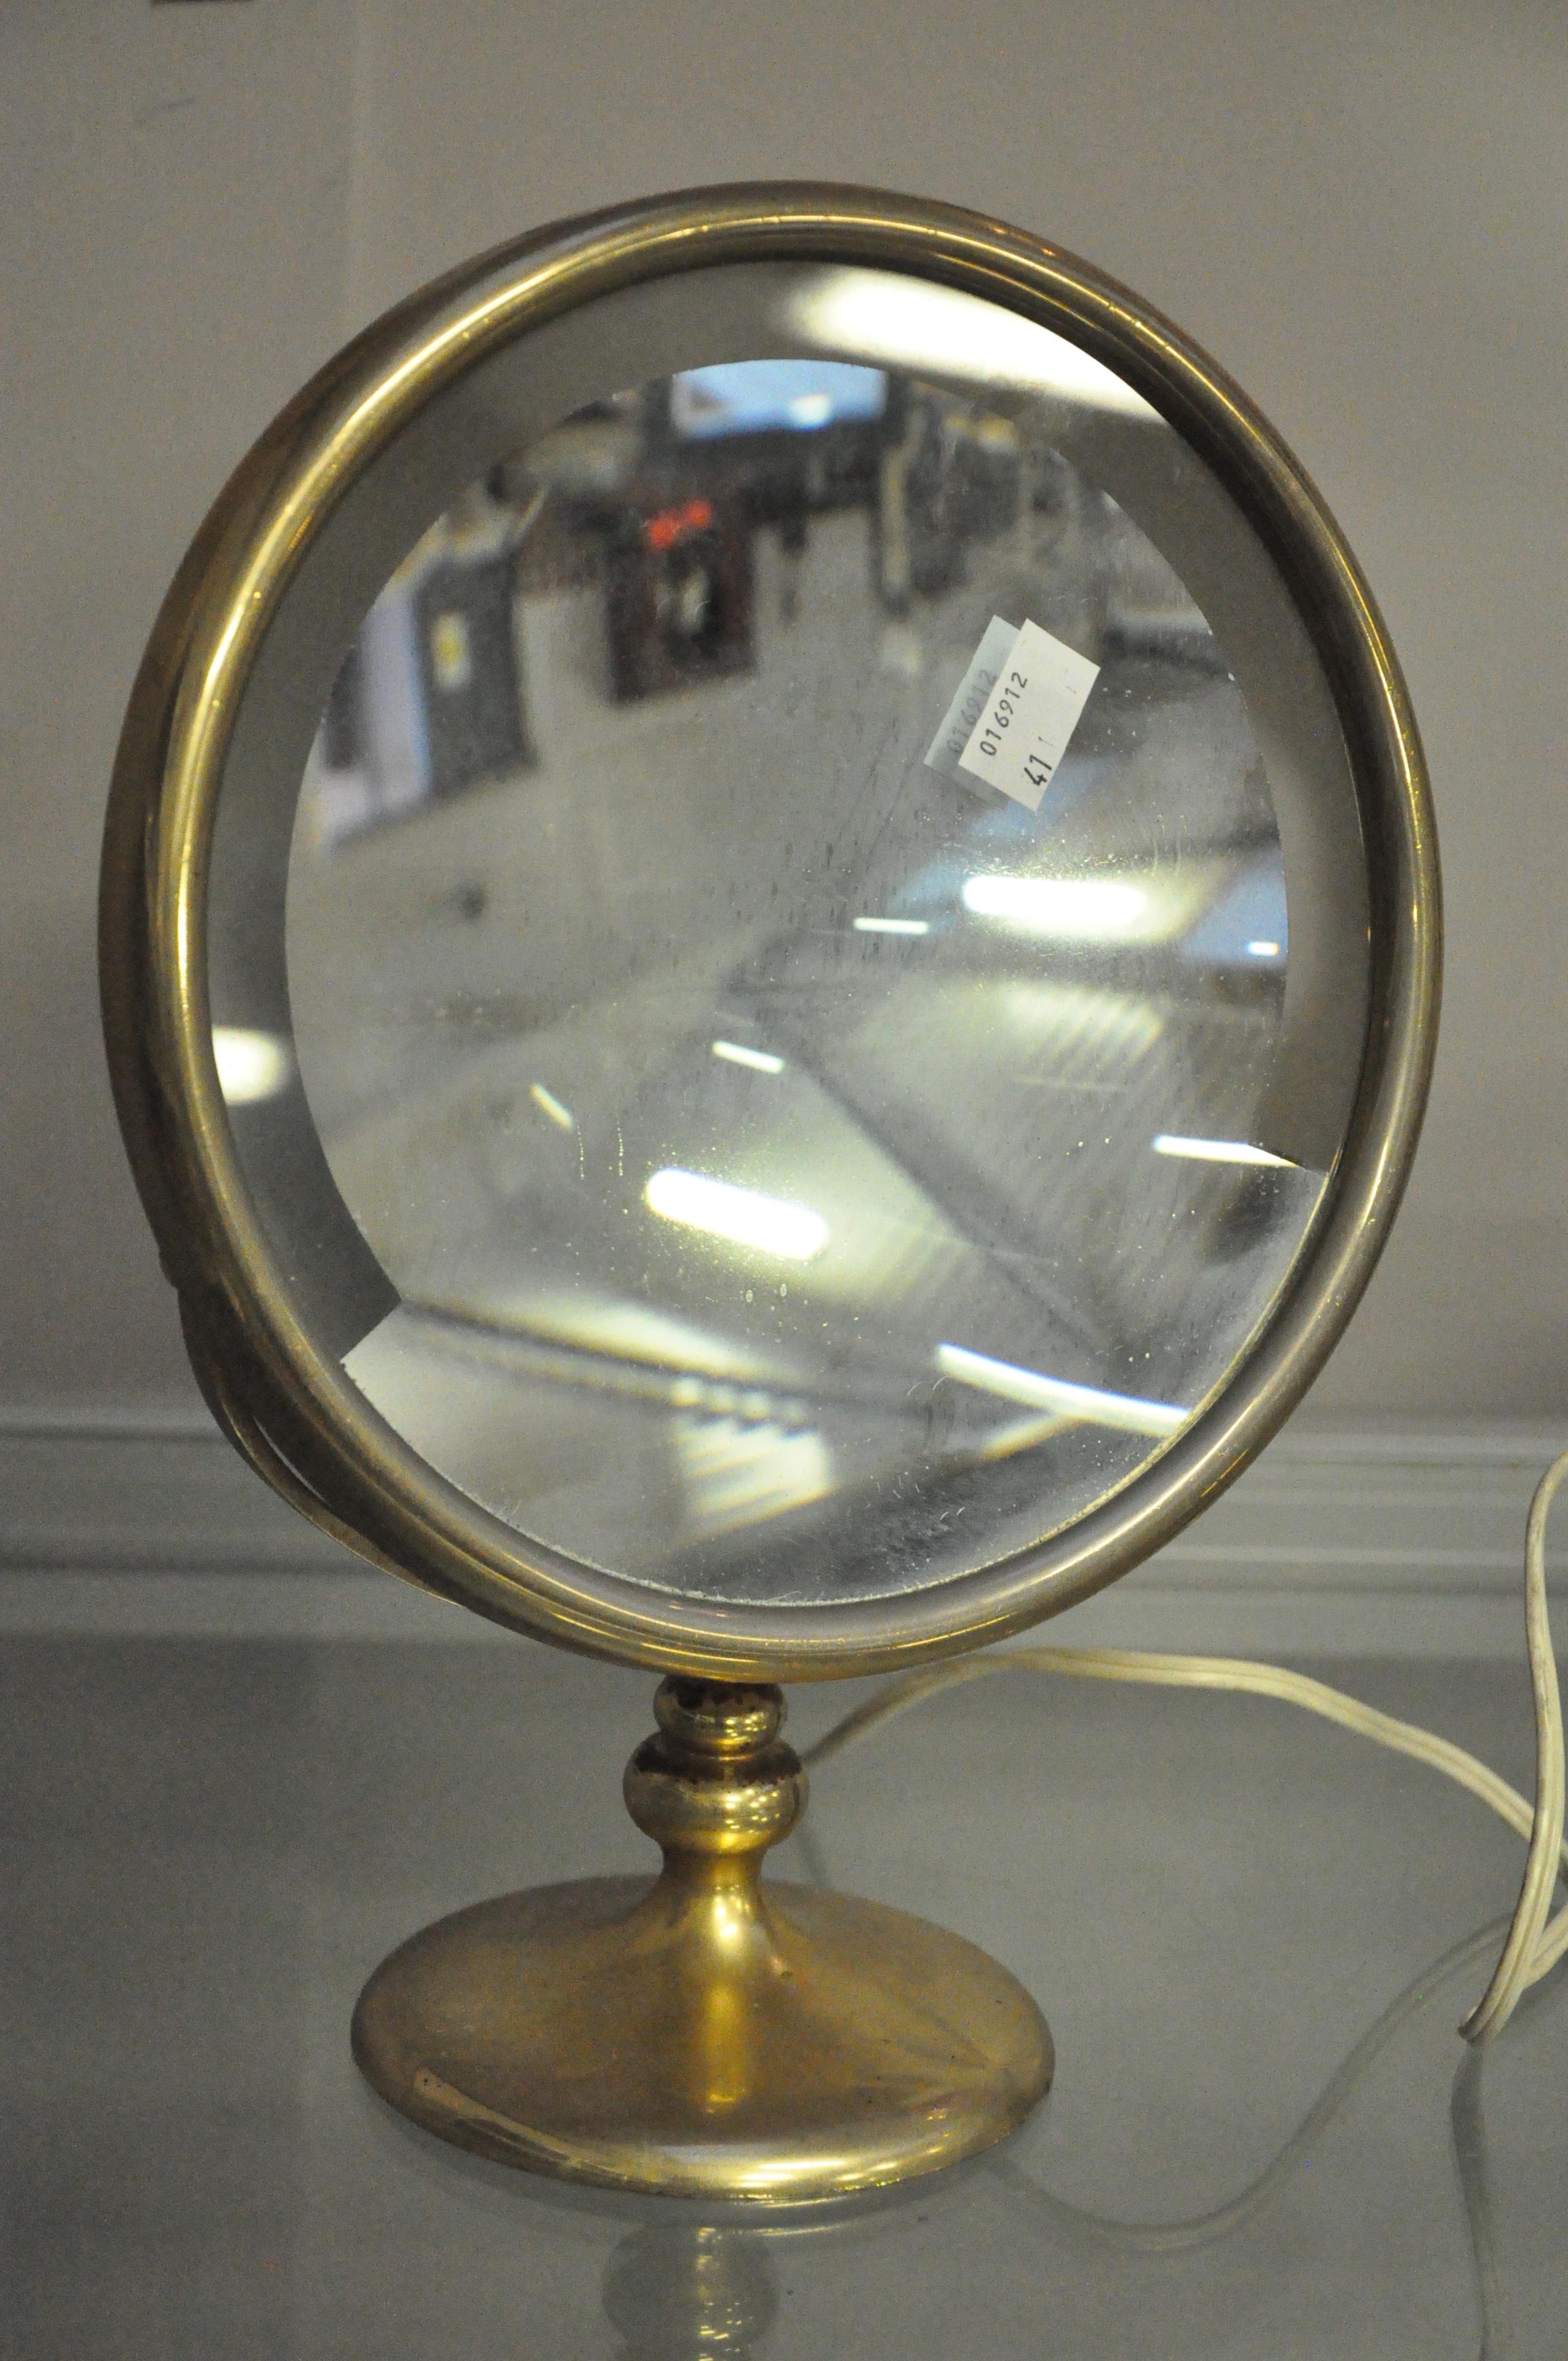 Two vanity mirrors together with display boxes for Cartier,